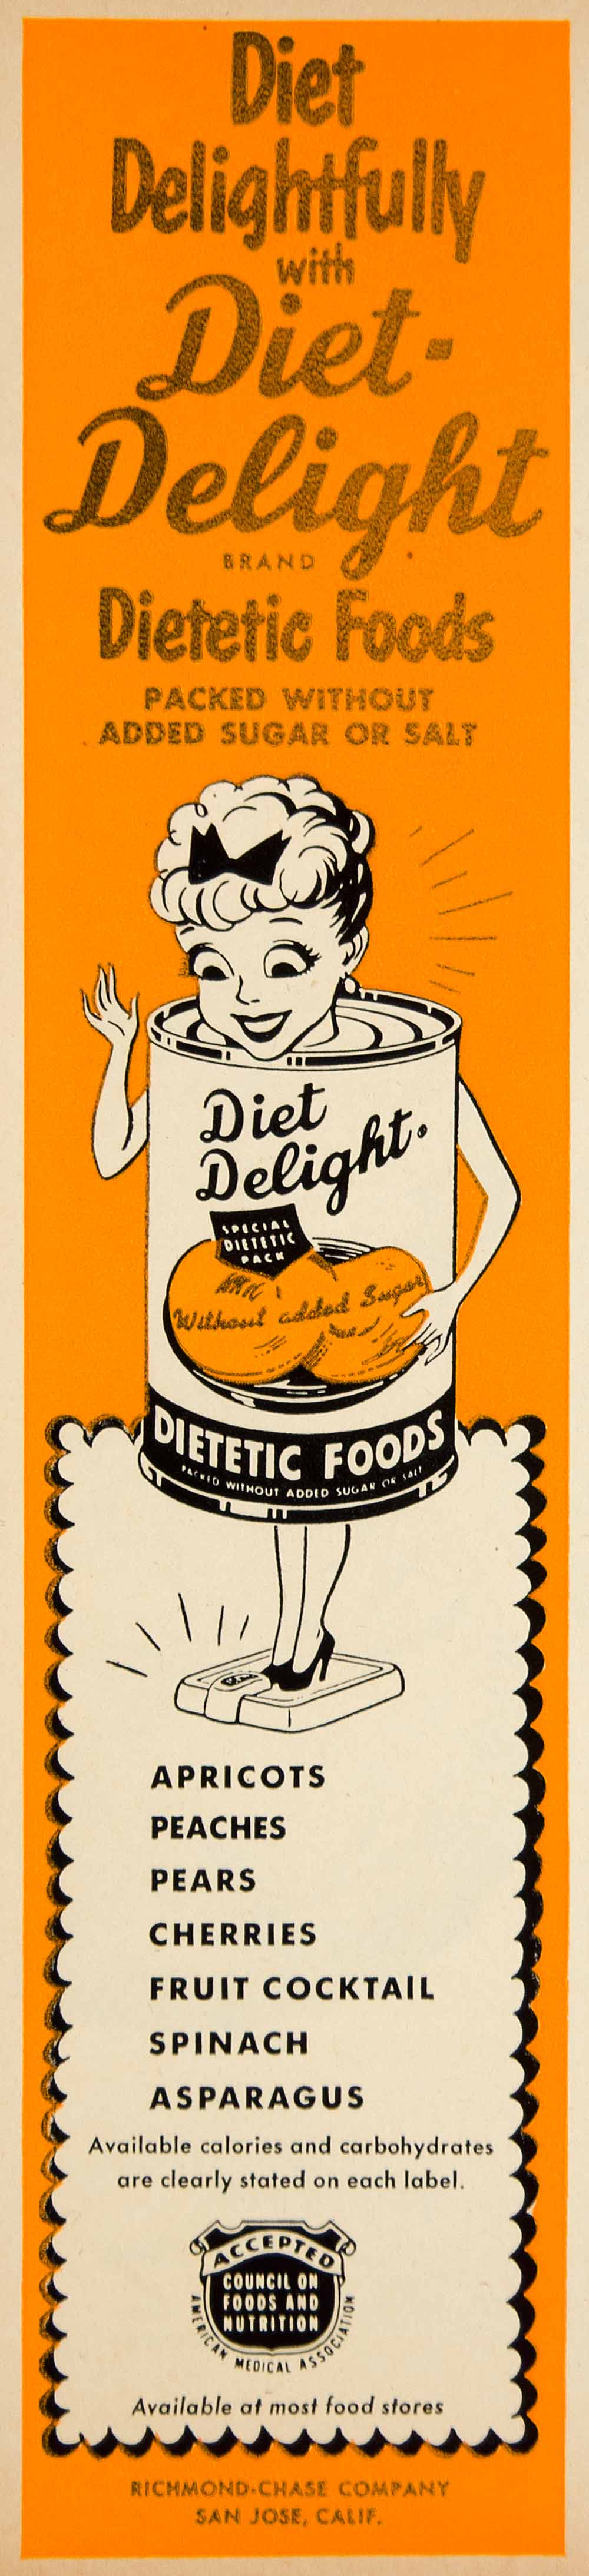 1951 Ad Richmond-Chase Diet Delight Dietetic Food Canned Fruit Vegetable YBL1